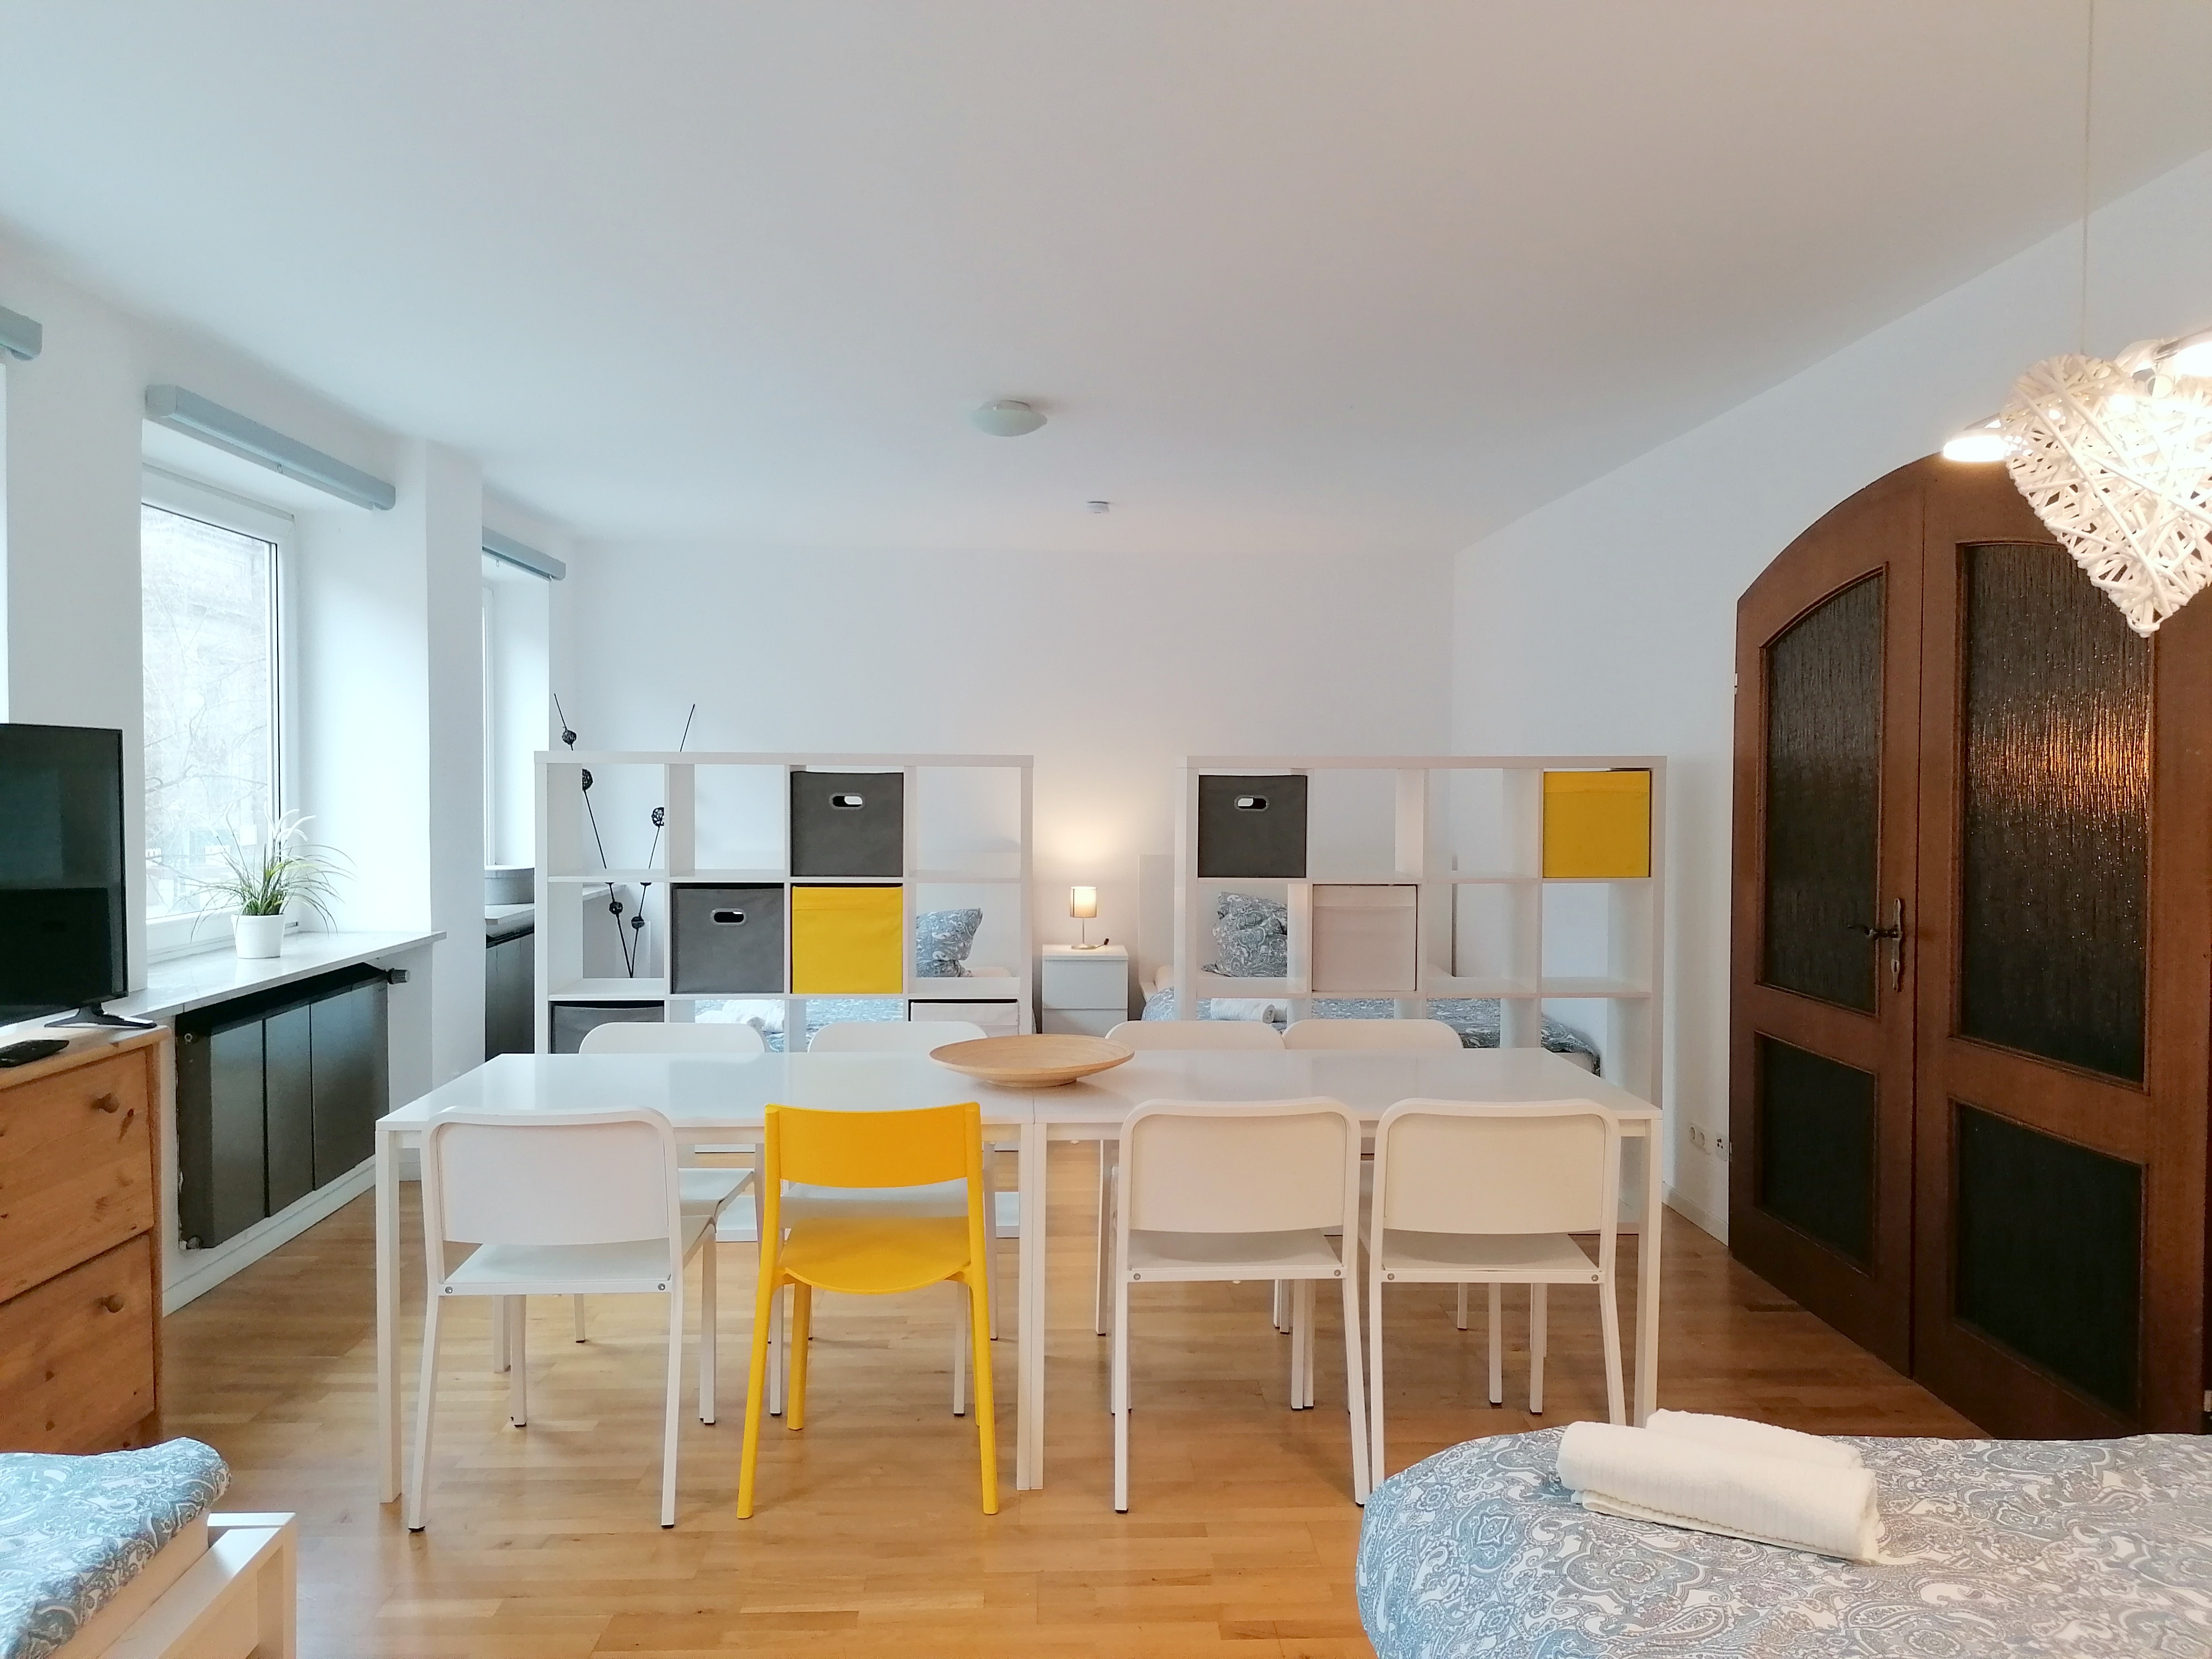 Apartment Ludwig - Flats for Rent in Nürnberg, Bayern, Germany